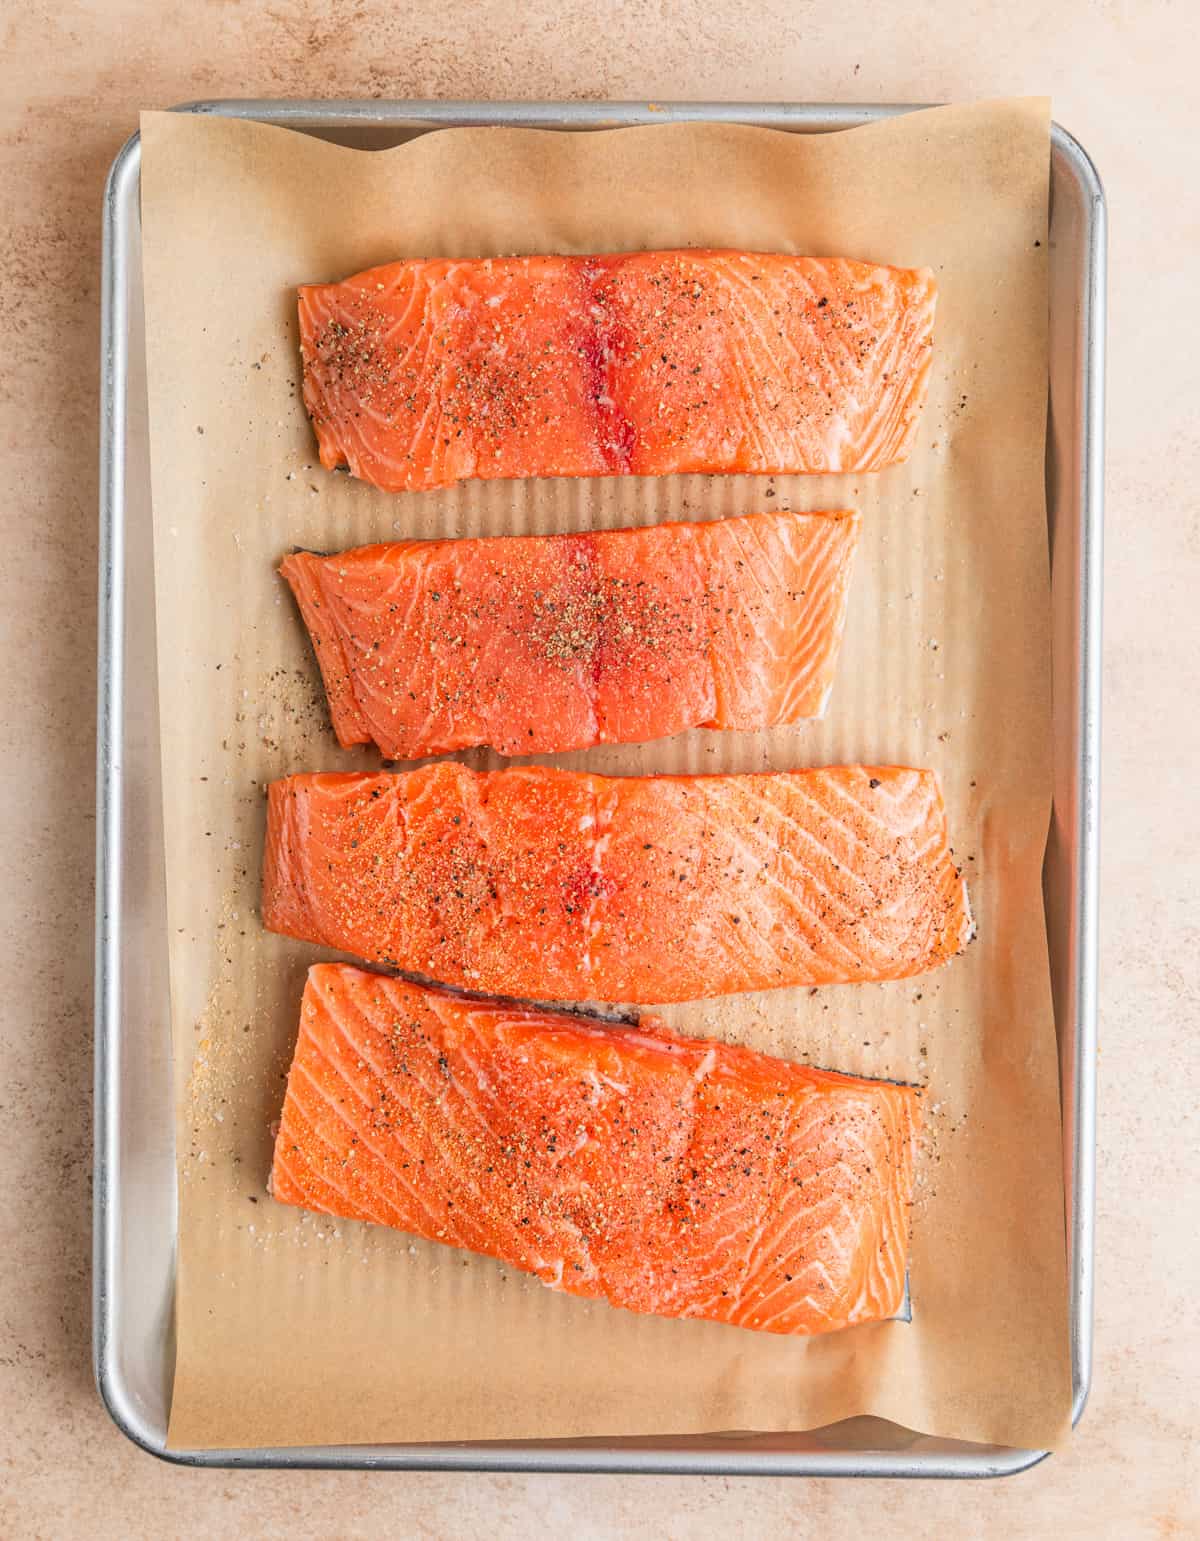 Raw salmon filets on parchment lined pan with seasoning.